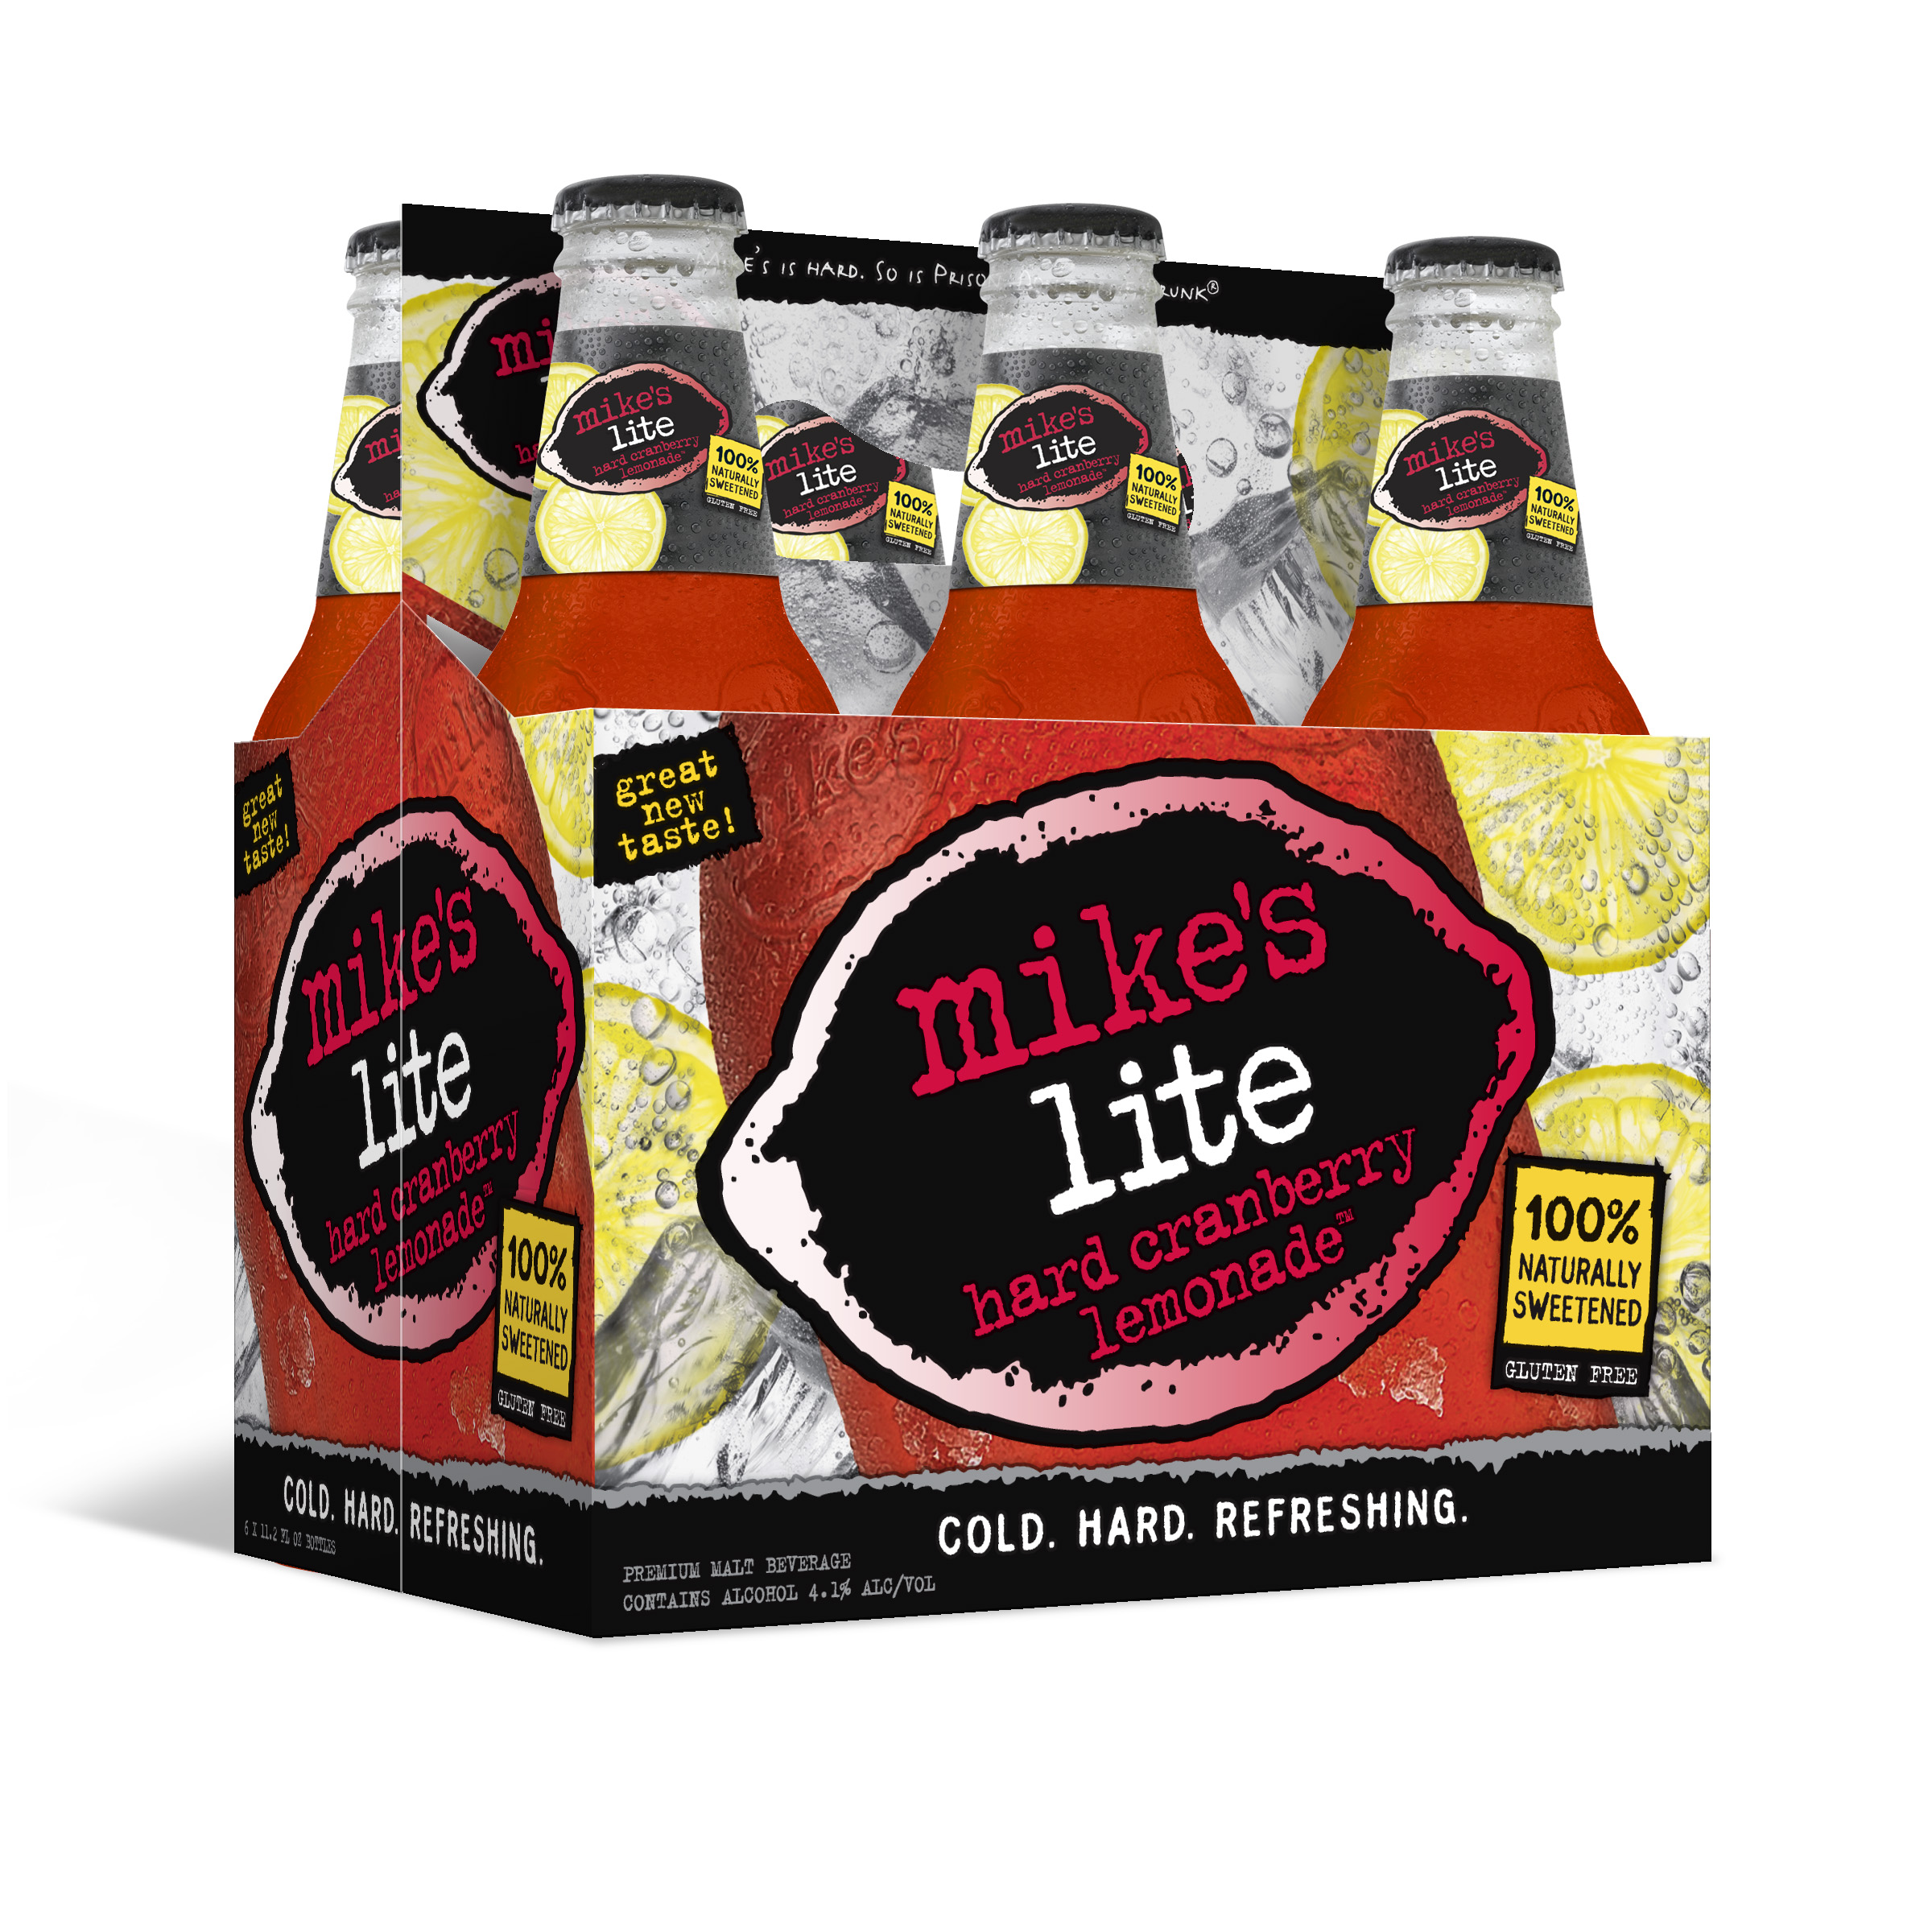 Images of Mikes Hard Lemonade | 2400x2400